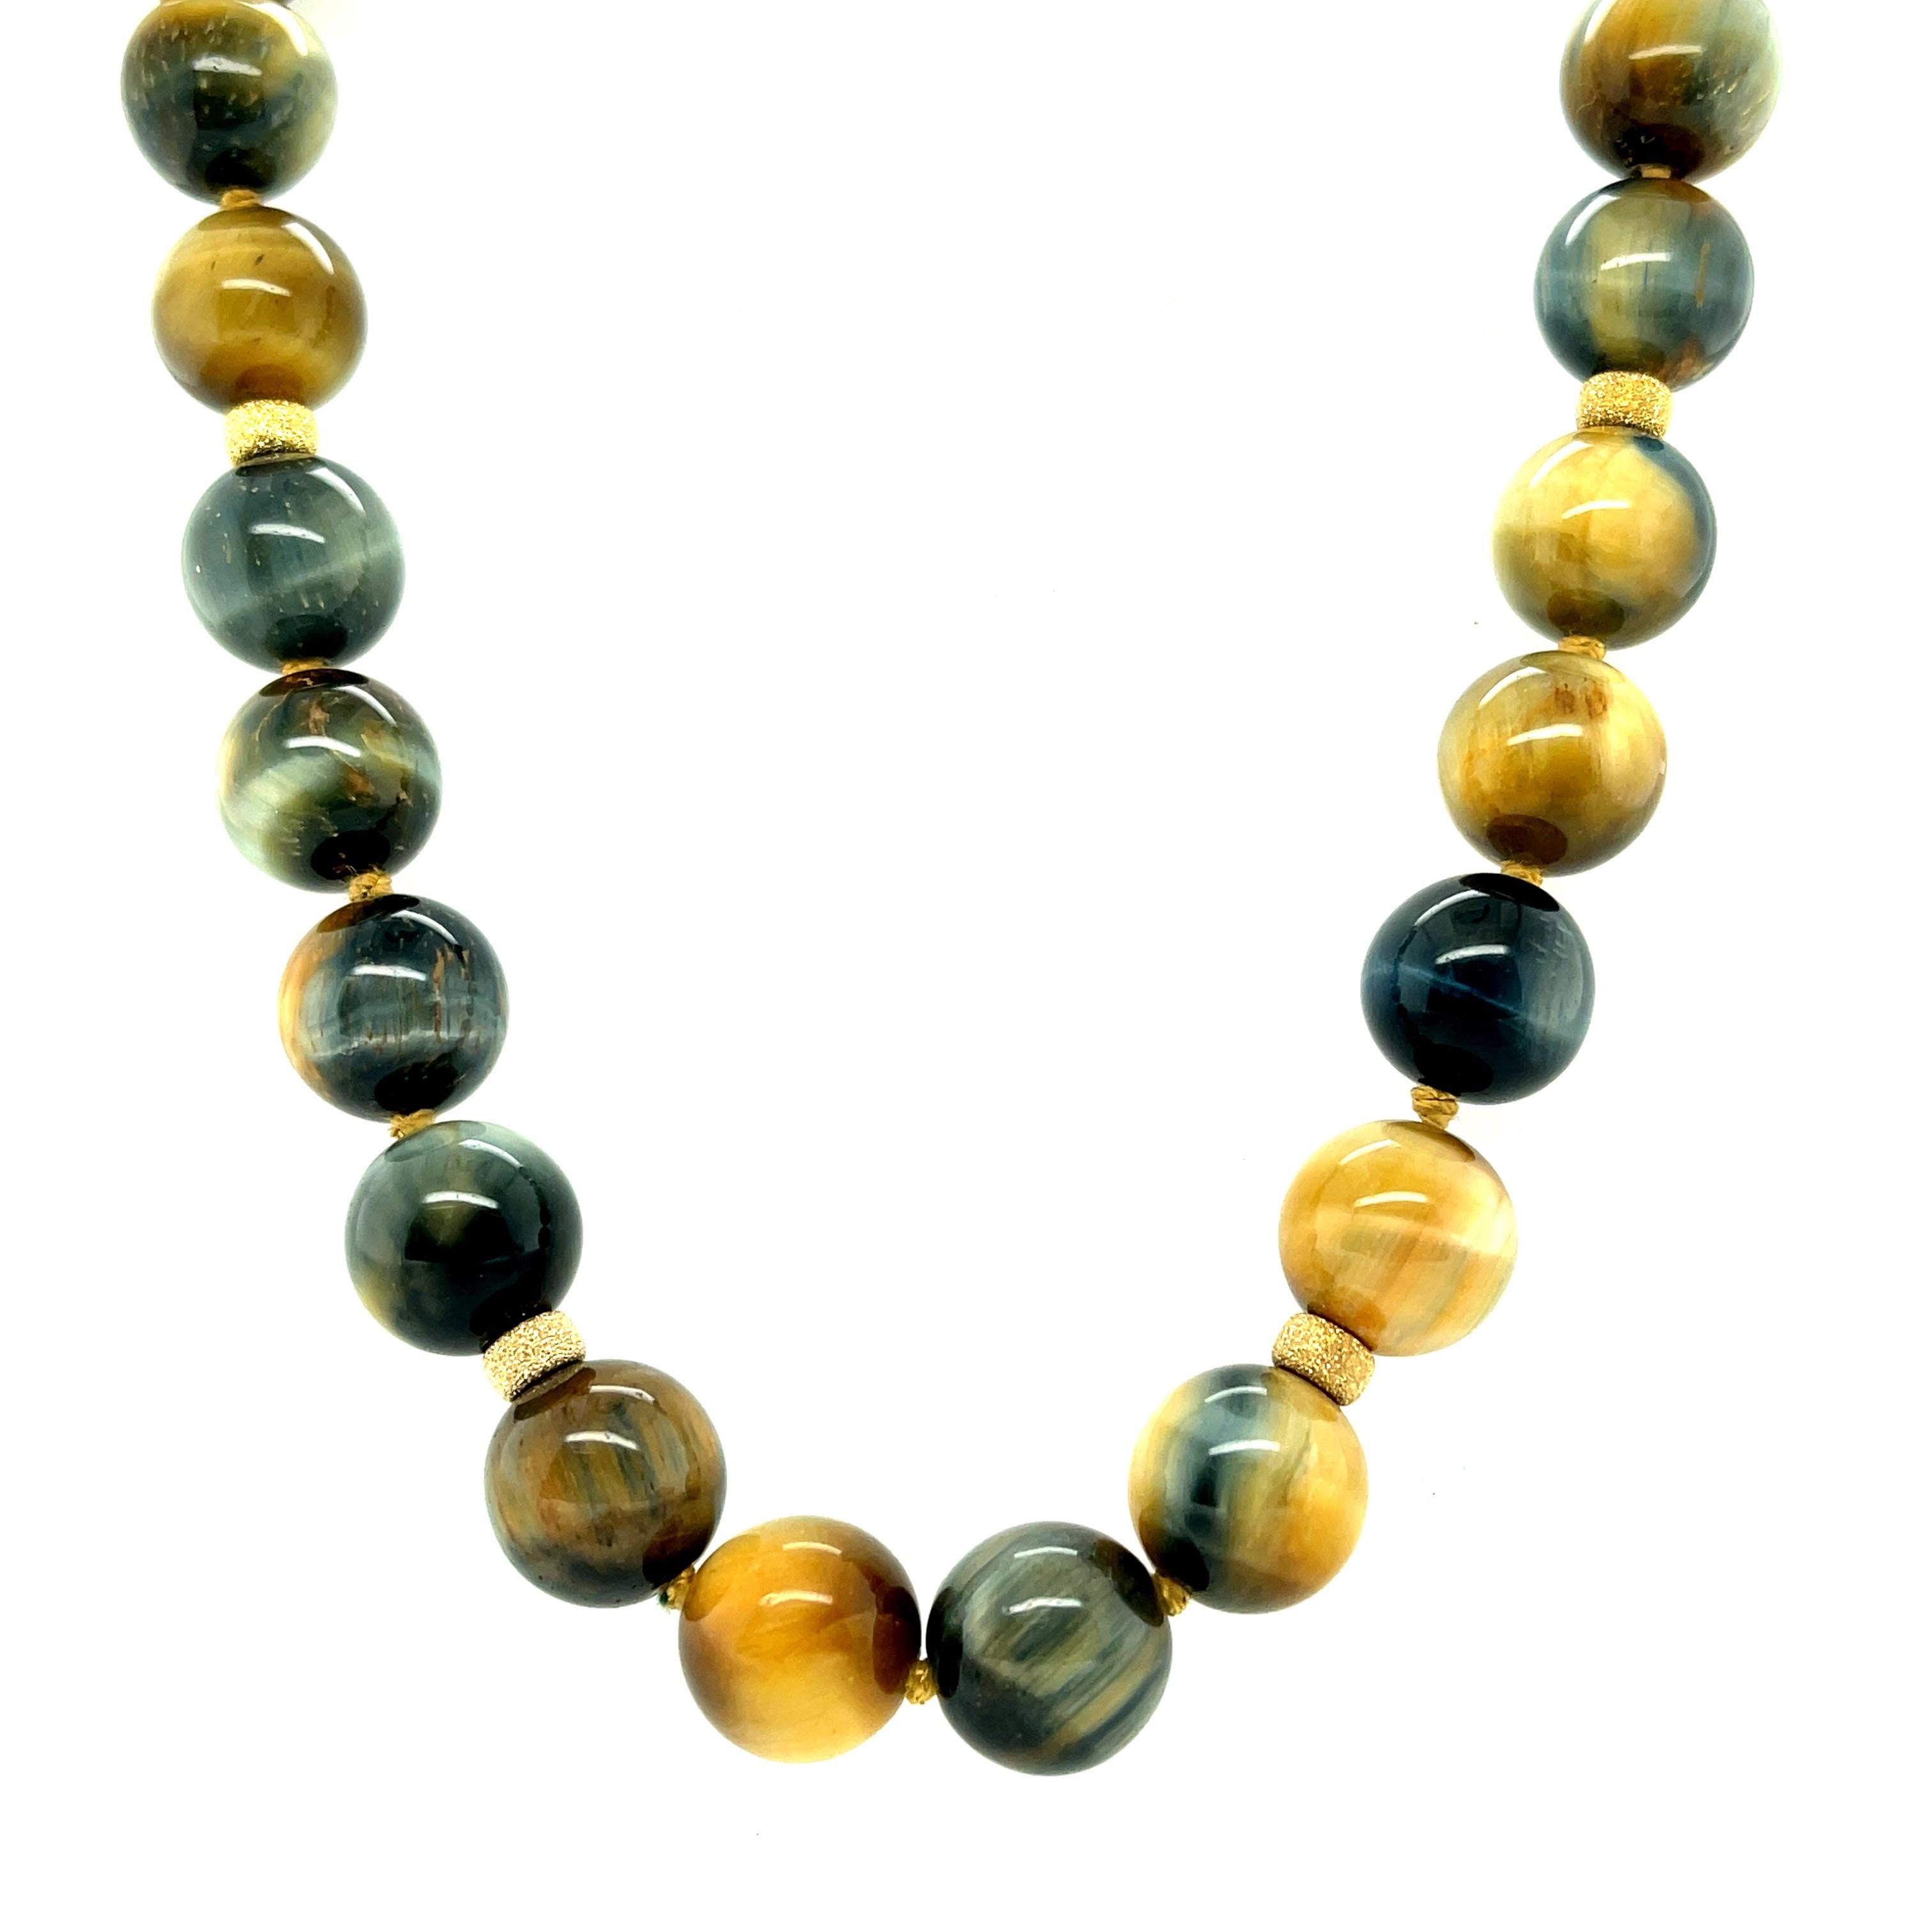 Bead Round Falcon, Cat's Eye Quartz Necklace with Yellow Gold Accents